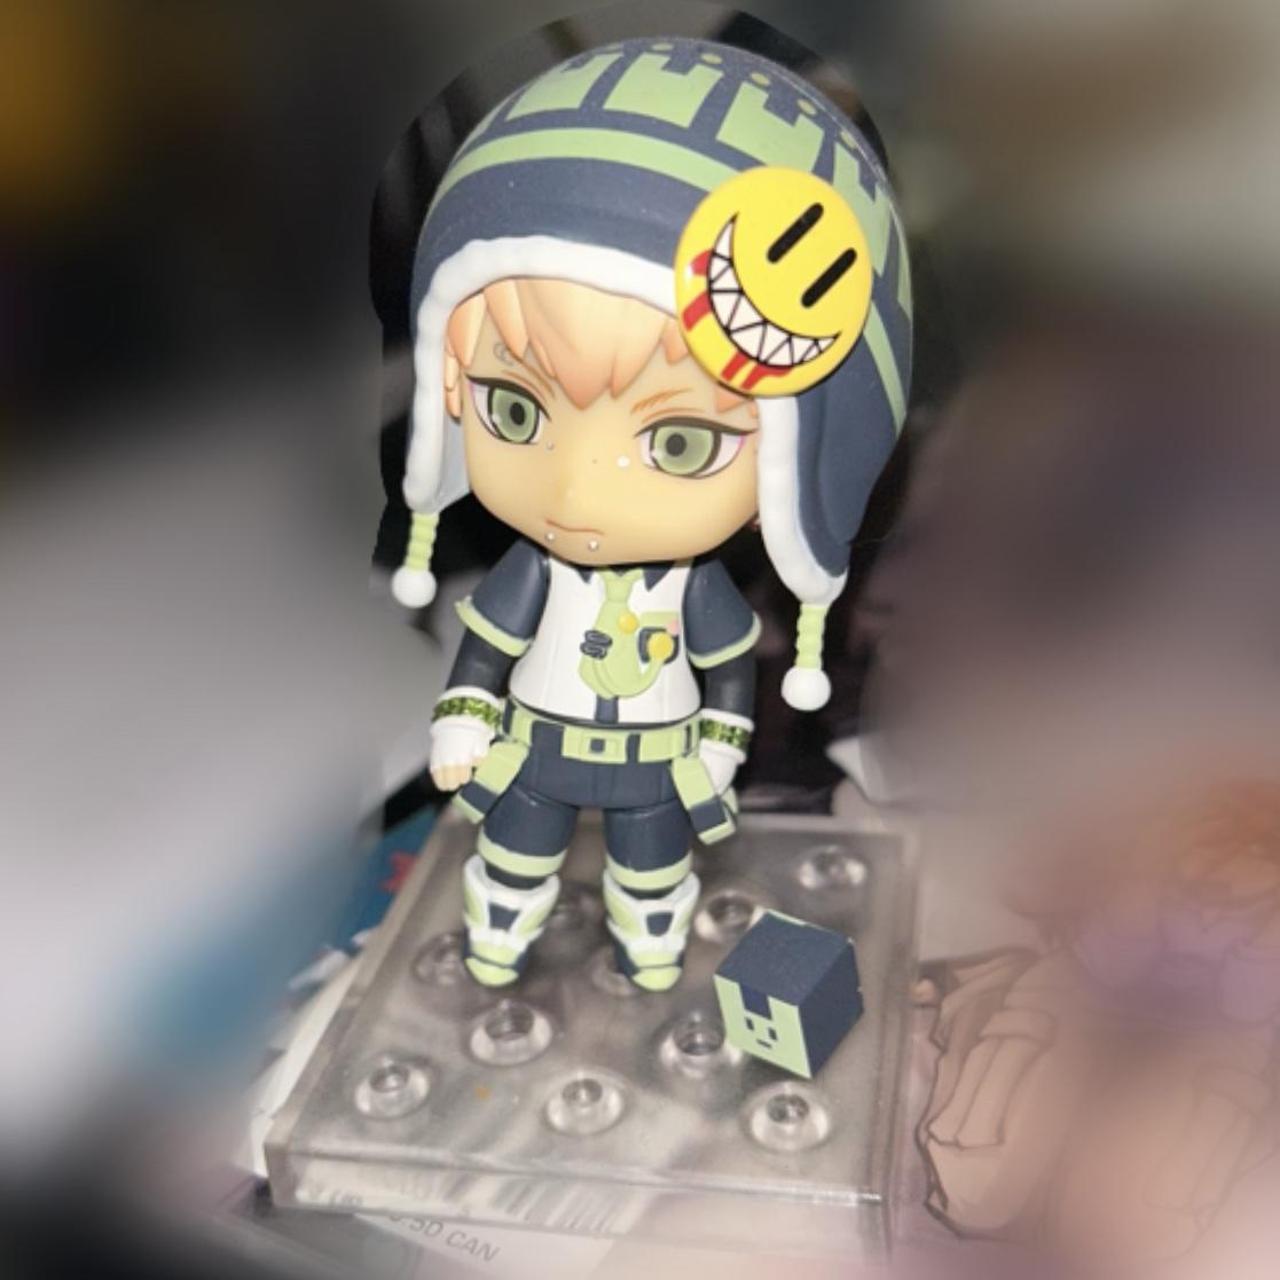 Pin on Anime Action Figure